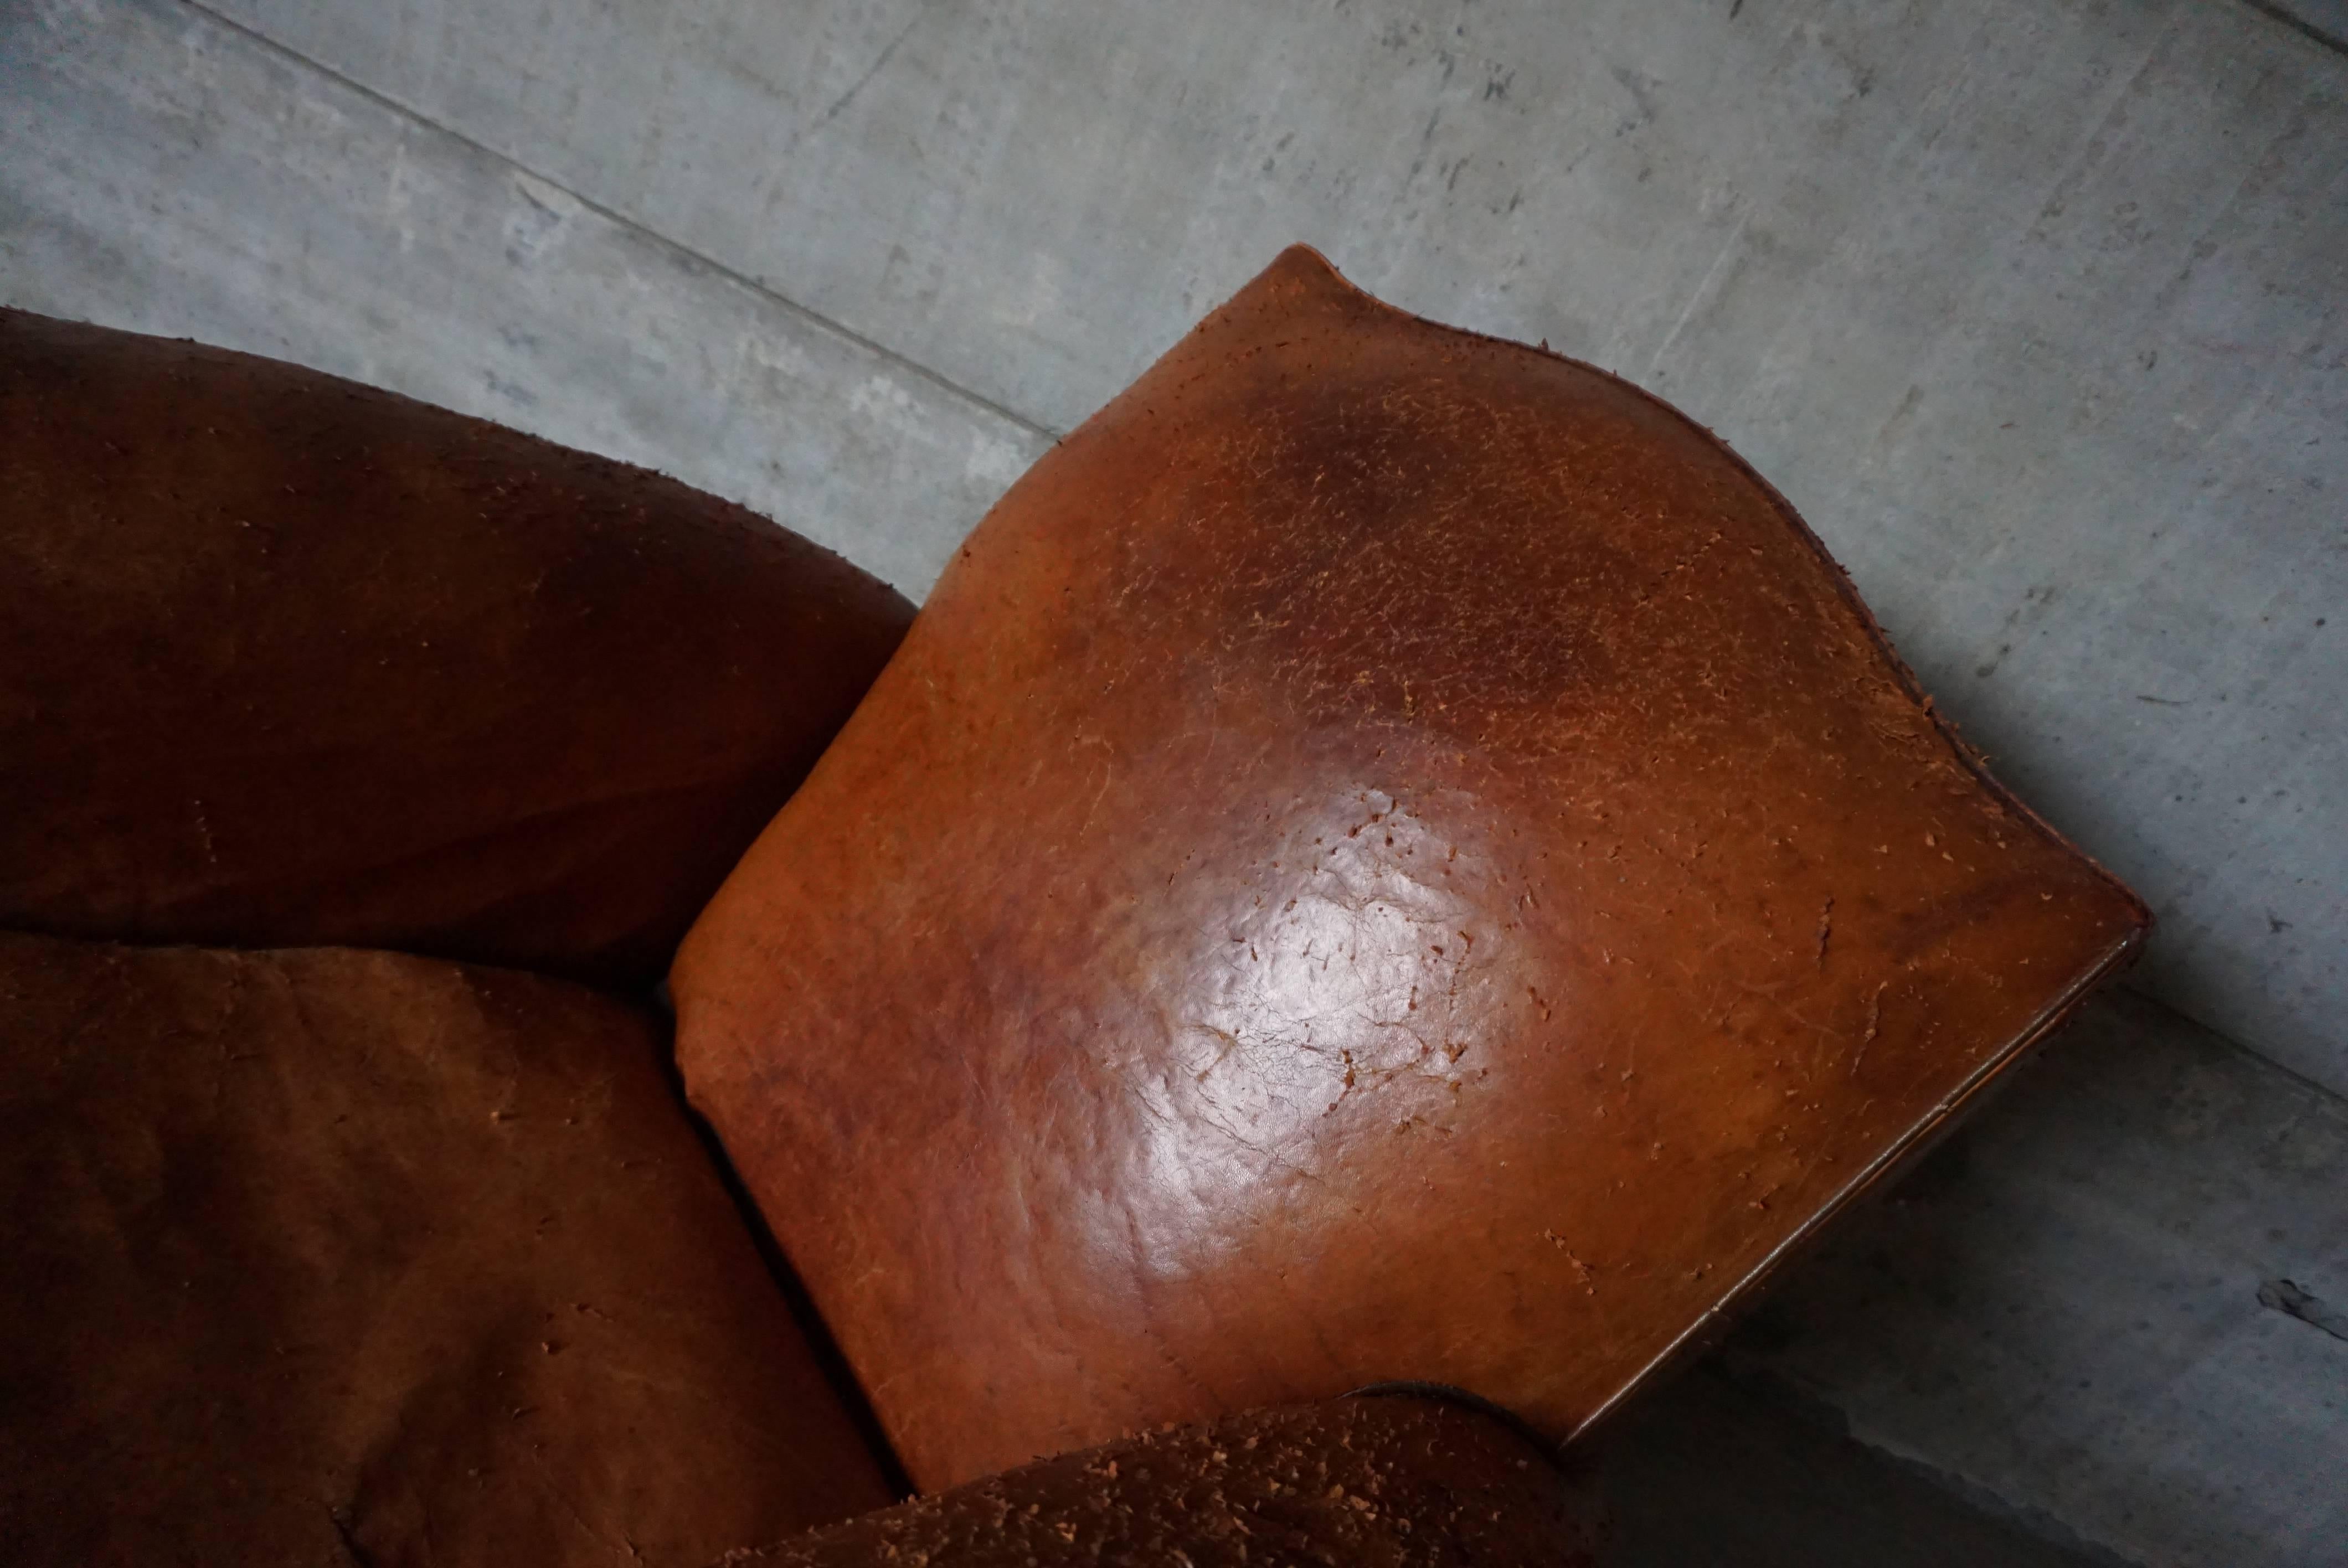 distressed leather club chair